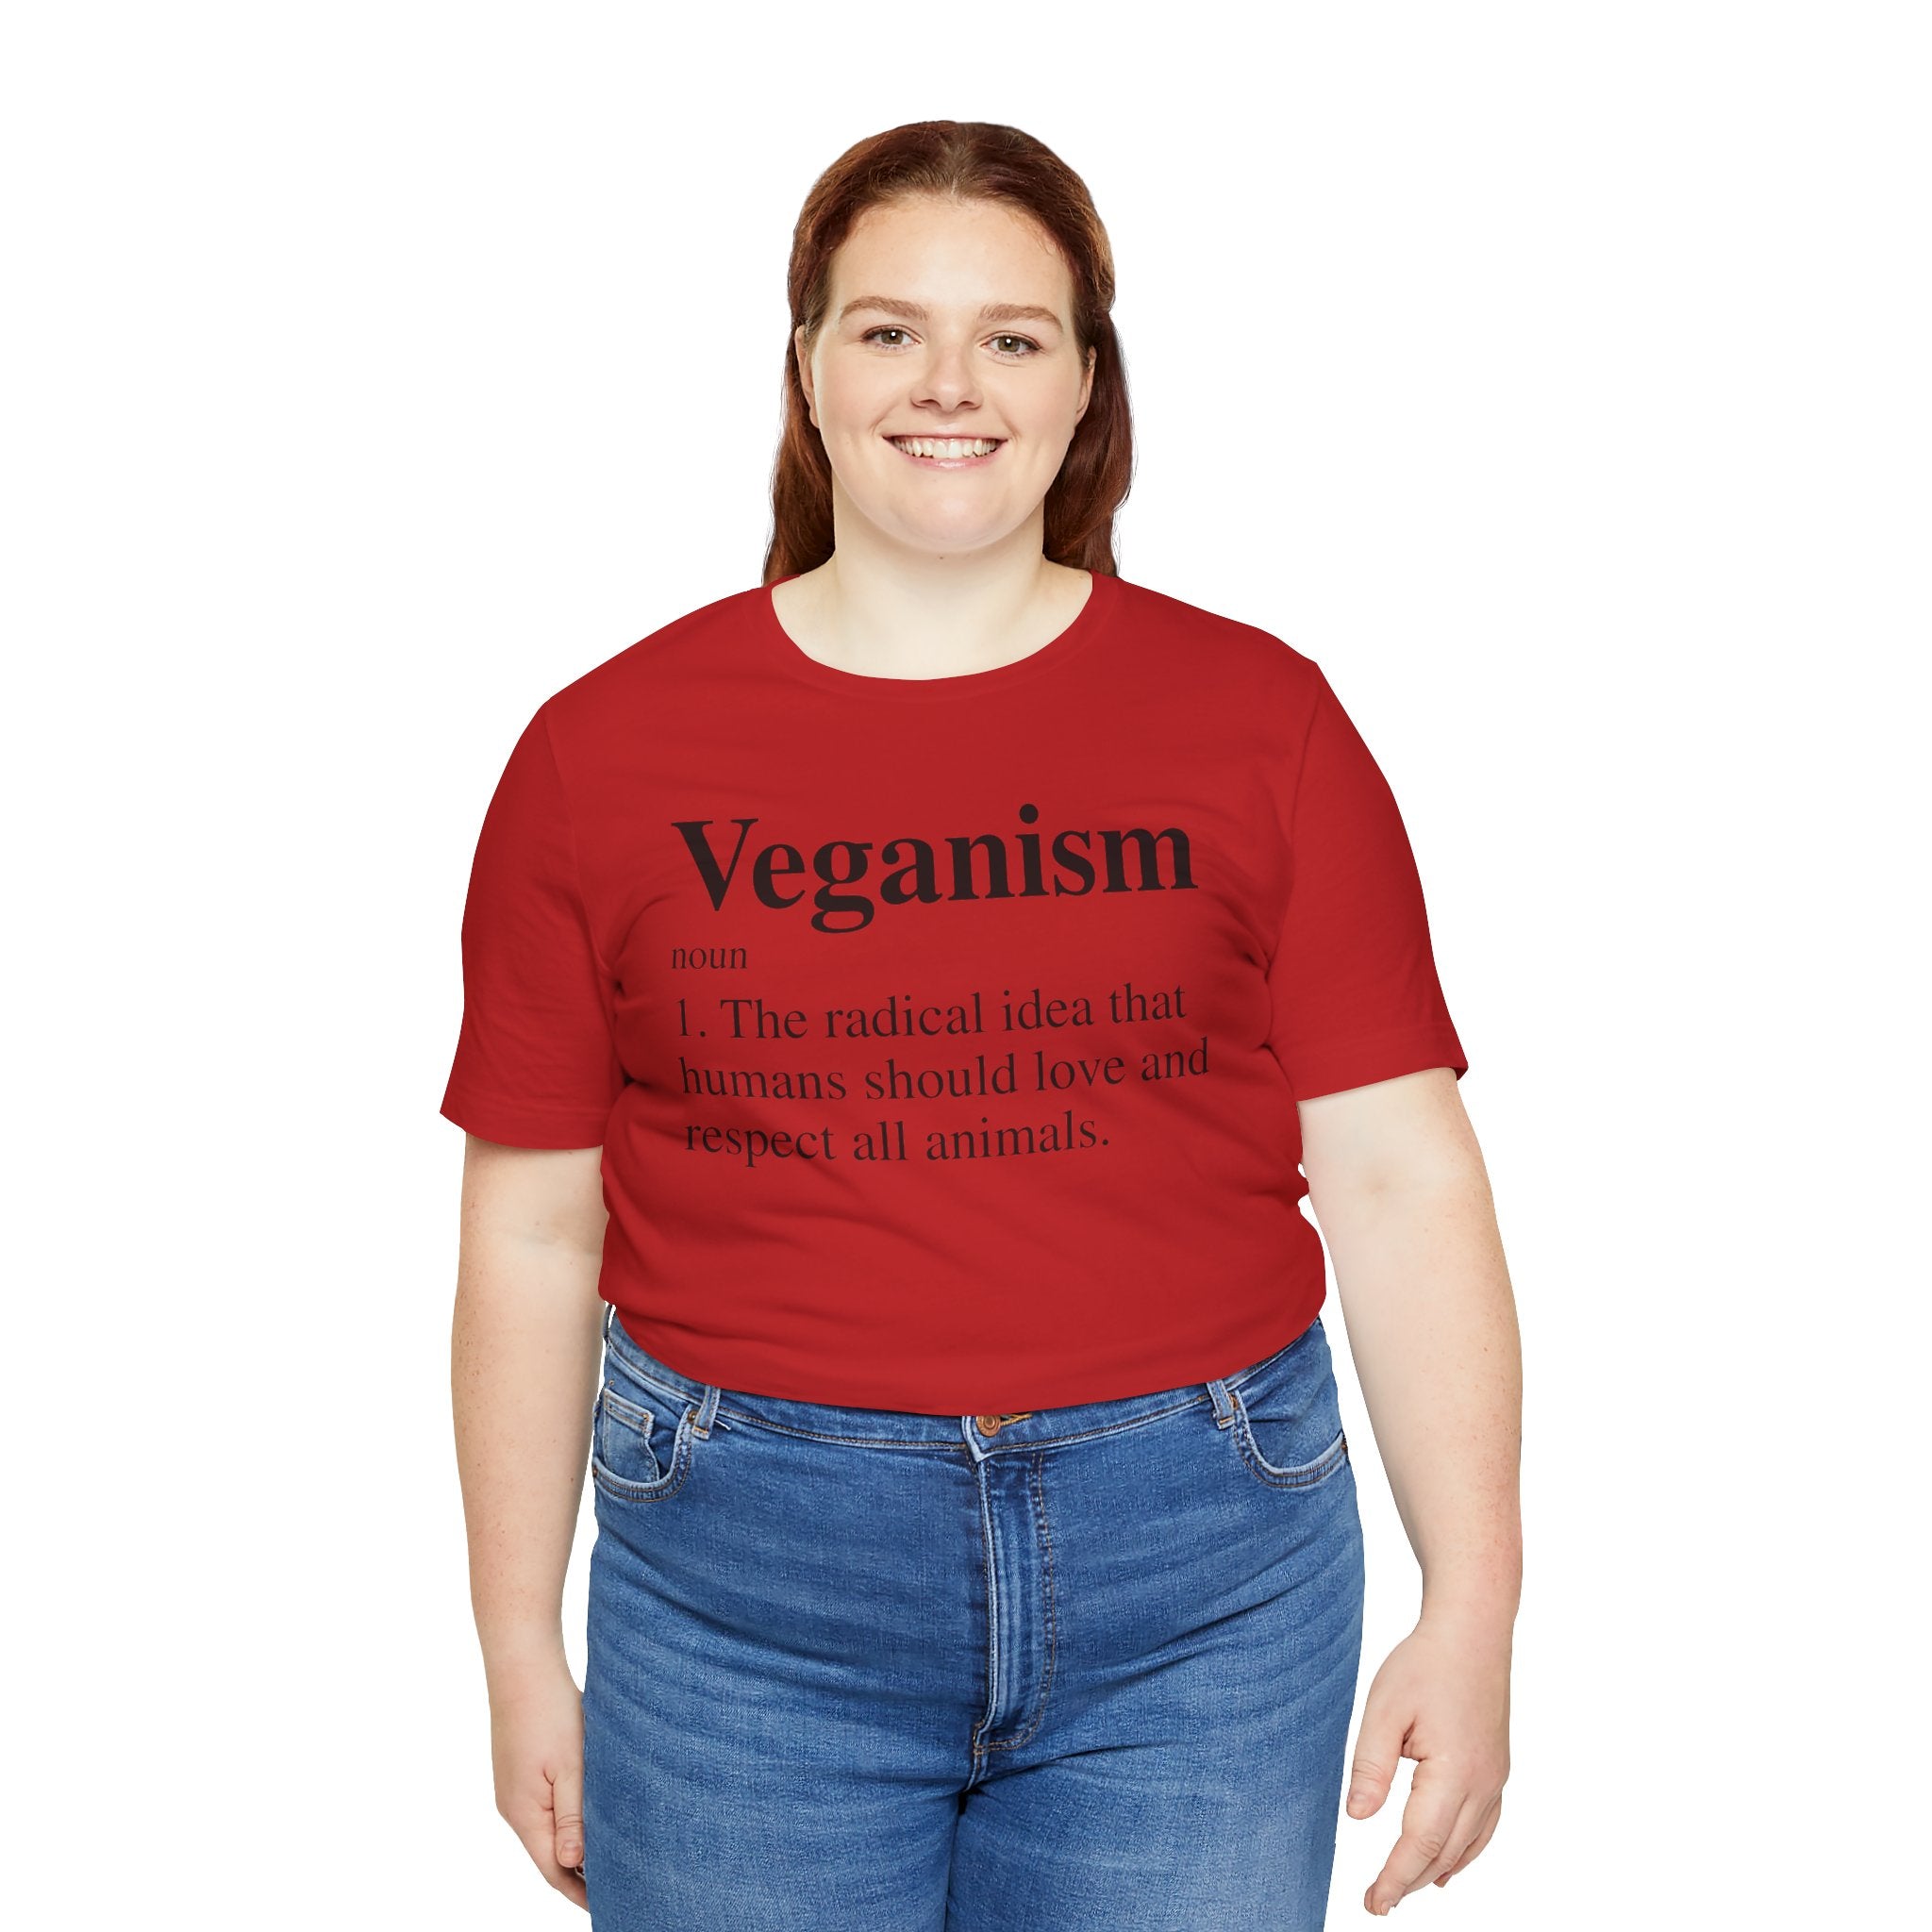 A woman in a red Veganism T-Shirt stands smiling, wearing blue jeans on a white background.